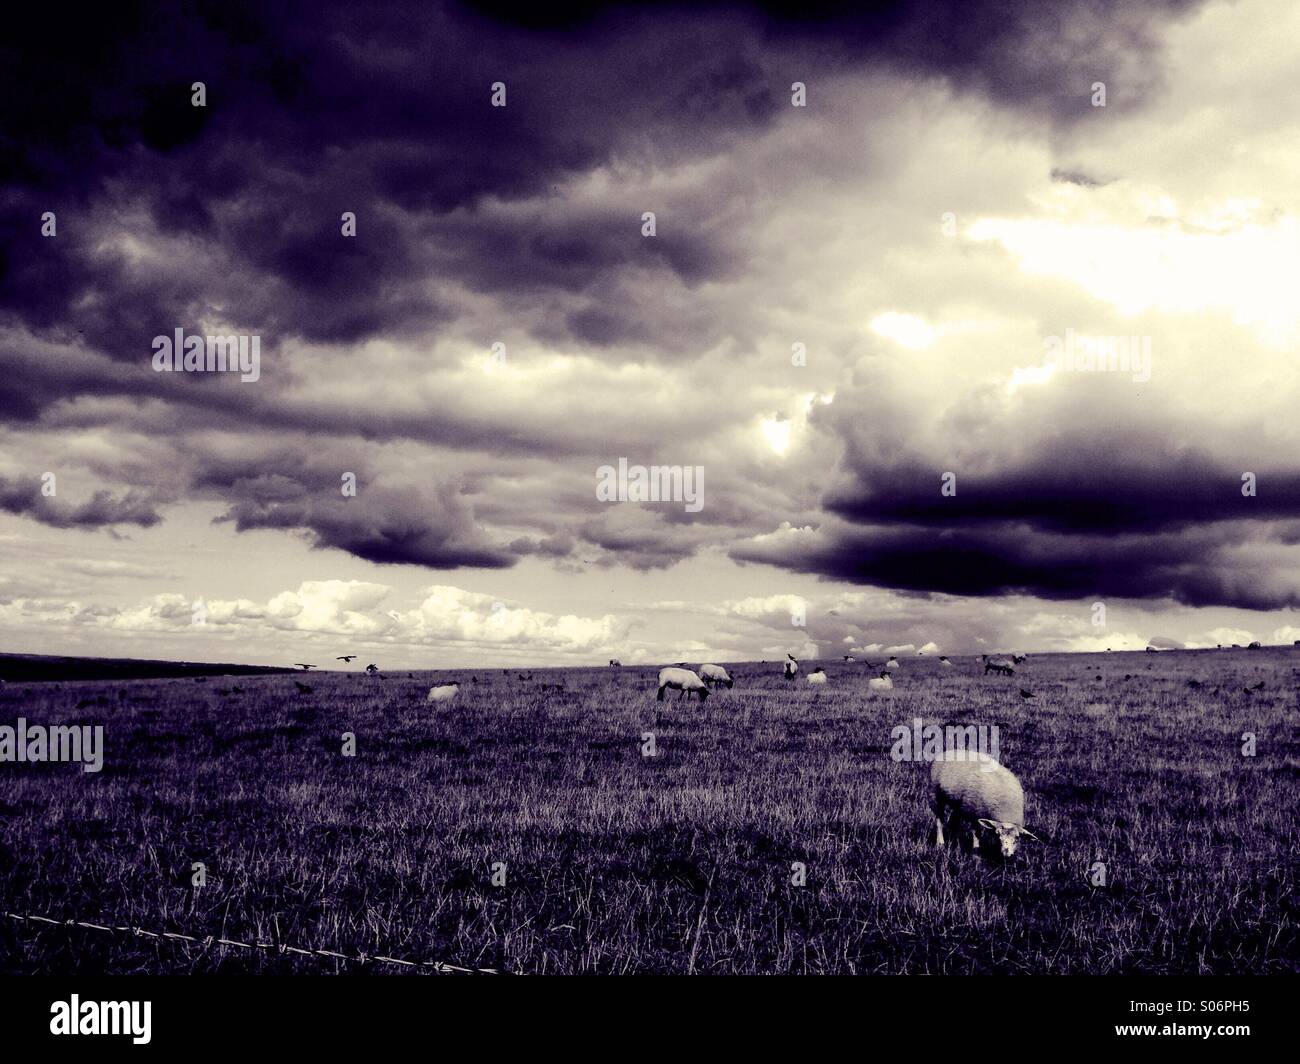 Sheep grazing in foreground under ominous black storm clouds - monochrome. Stock Photo